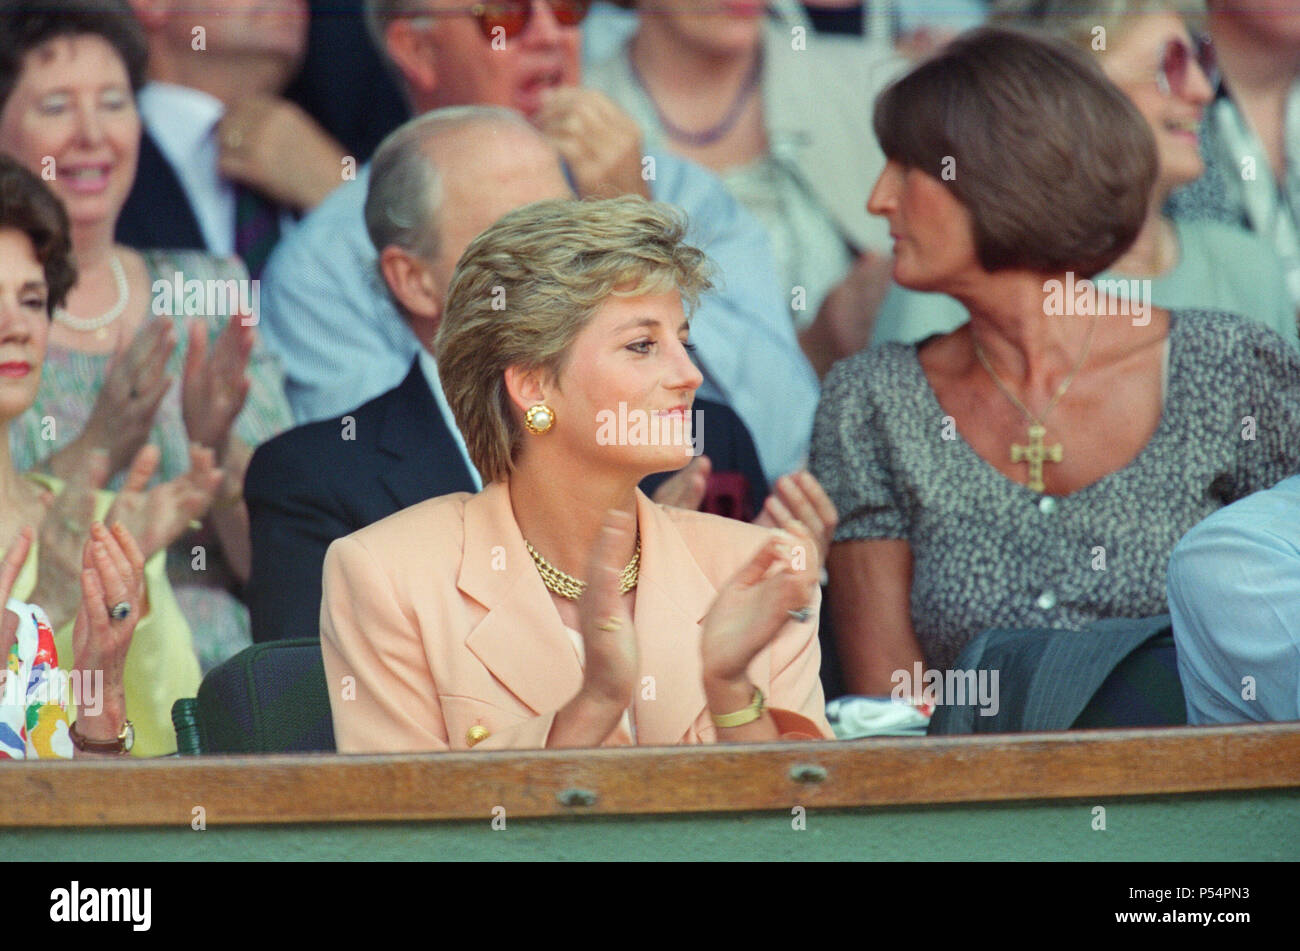 HRH The Princess of Wales, Princess Diana, attends the 1993 Men's Singles Wimbledon Tennis Final.   In other frames in this set, The Princess is shown sitting next to her mother Frances Shand Kydd.  Regarding the match, Pete Sampras defeated Jim Courier 7 – 6, 7 - 6, 3 – 6, 6 –3 in the final to win the Gentlemen's Singles title at the 1993 Wimbledon Championships. This was the first of Pete's Open Era record of seven Wimbledon titles.  Picture taken 4th July 1993 Stock Photo